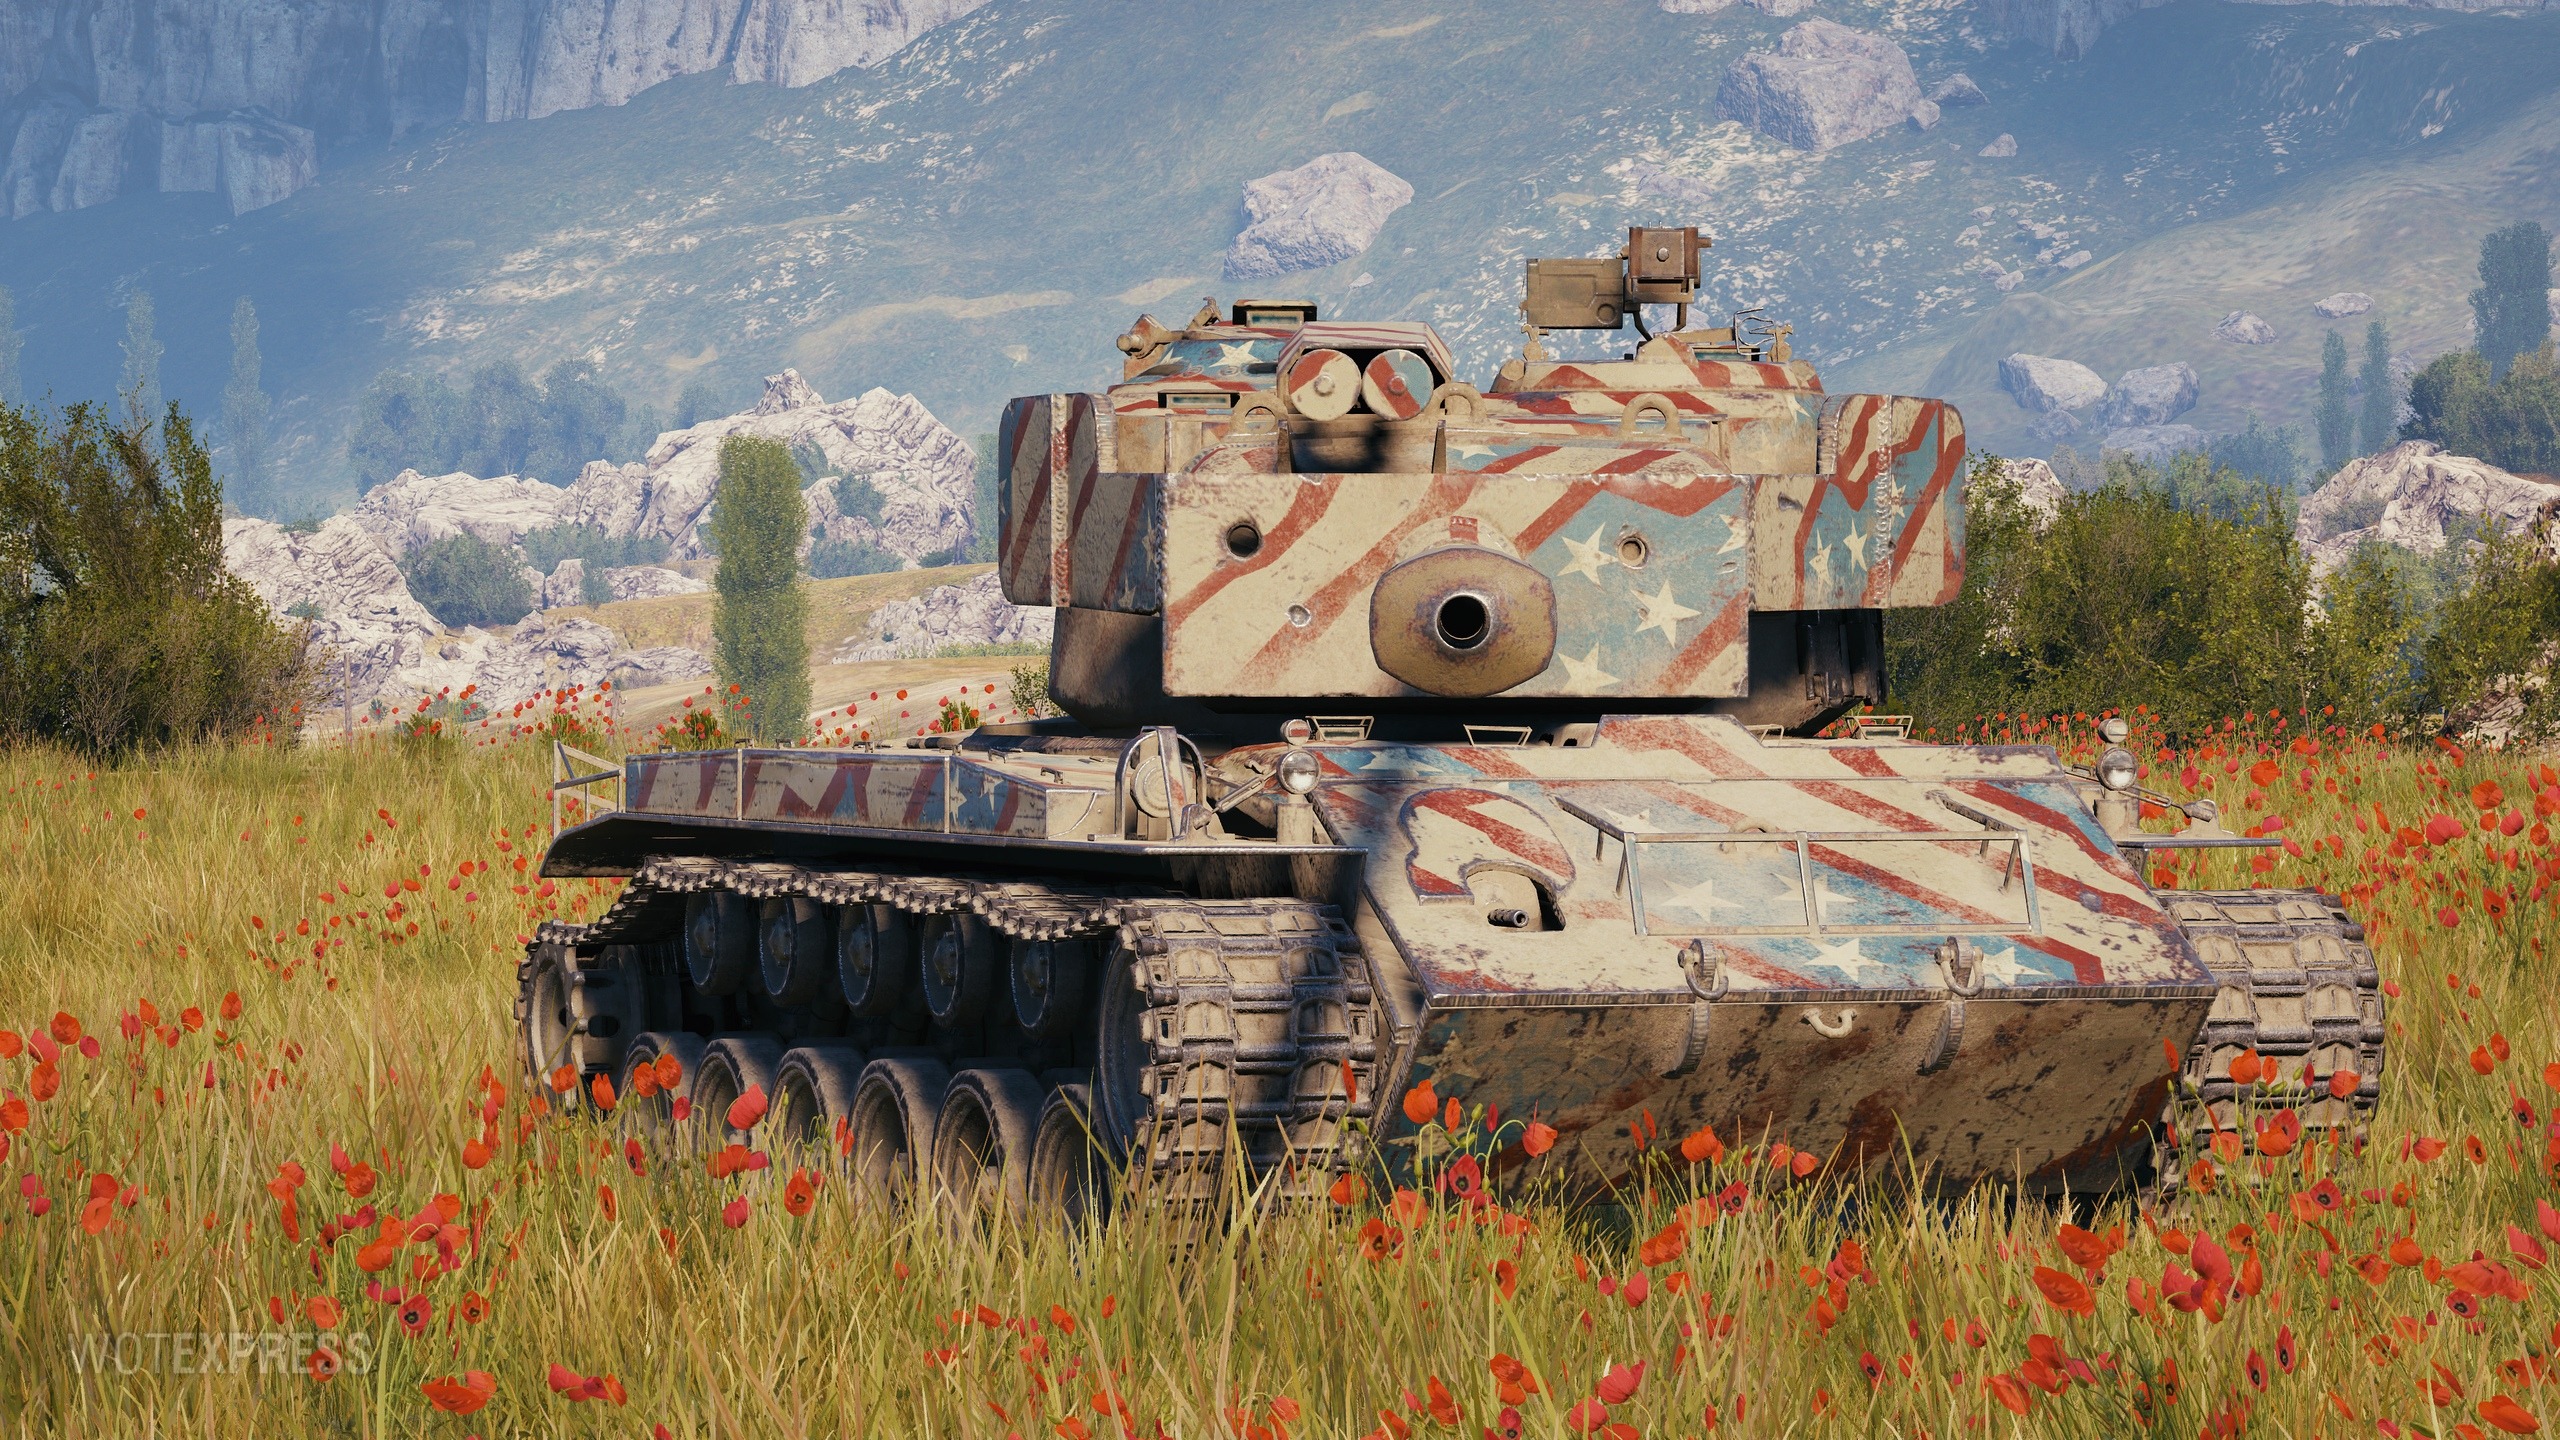 Wot ares. Т26е4 SUPERPERSHING. Танк t26e4 SUPERPERSHING. T26e4. Т26е4 вот.